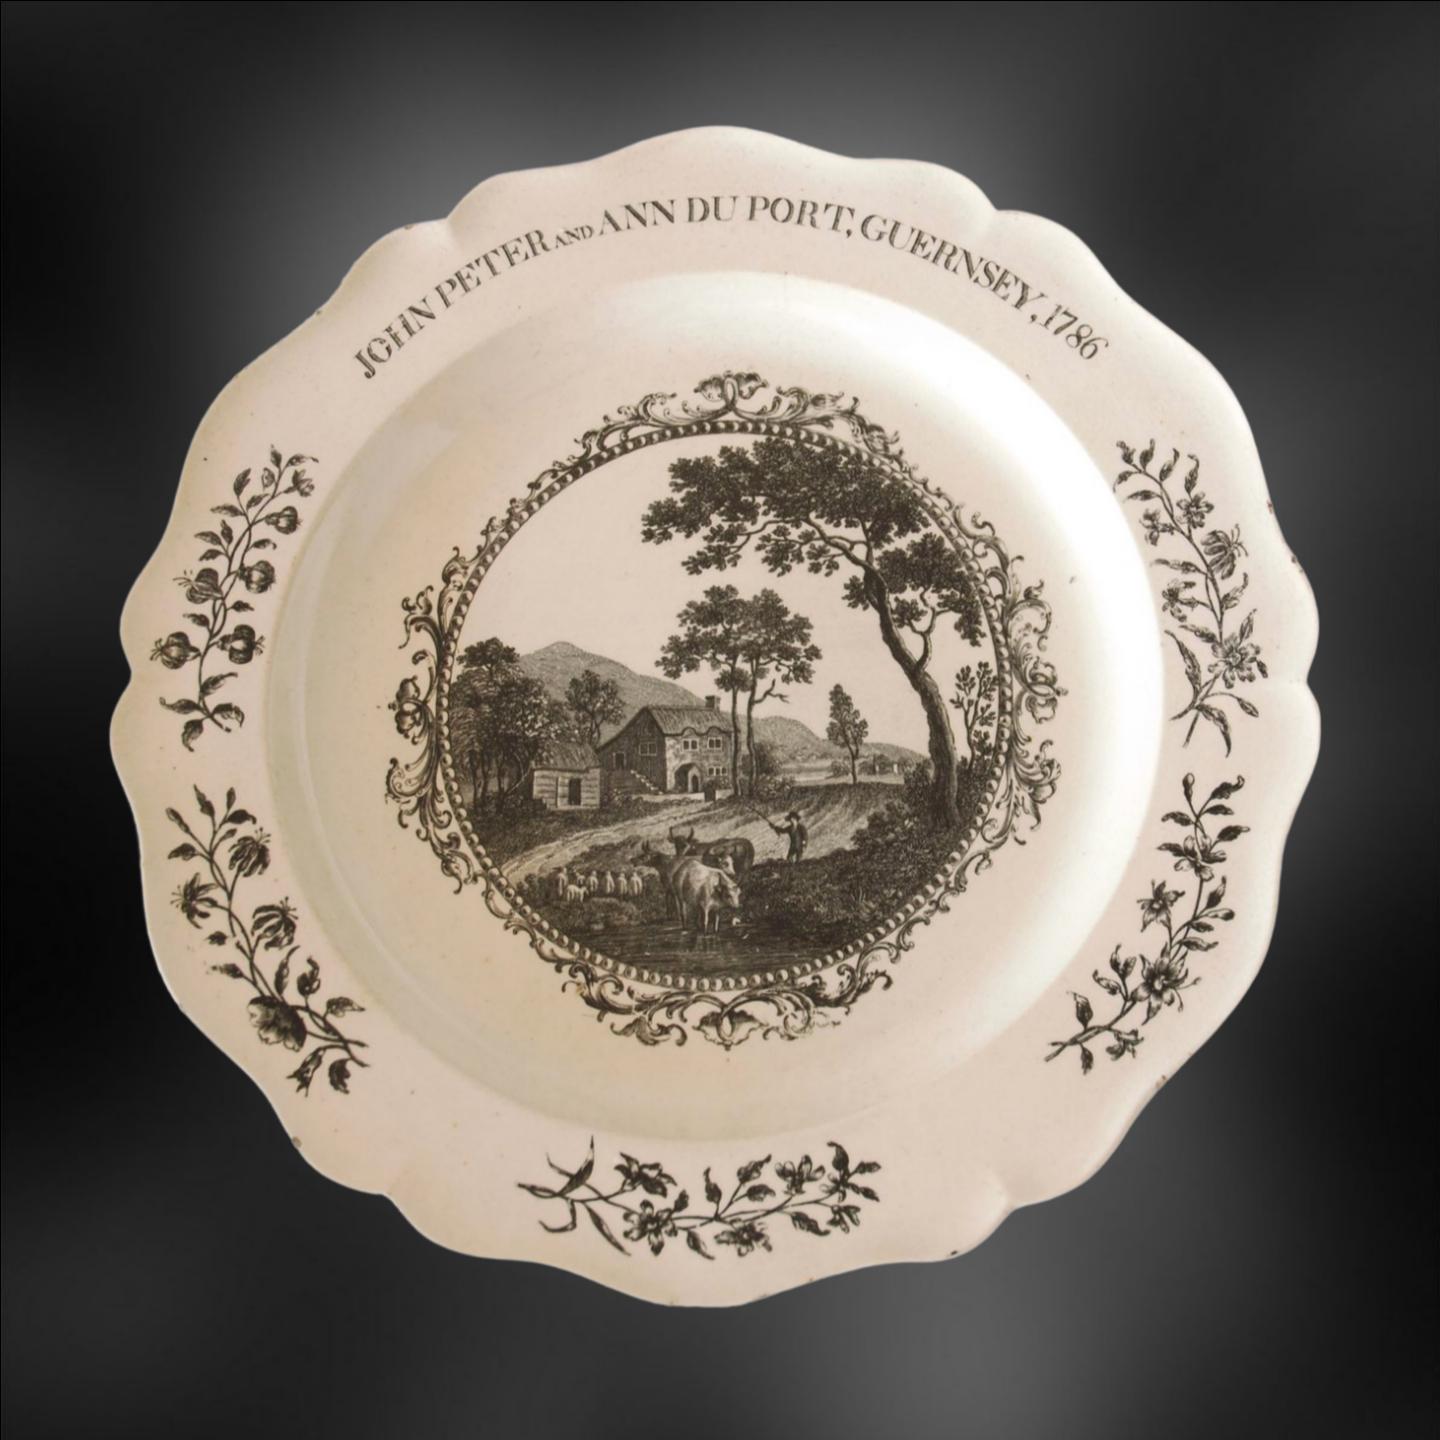 A creamware plate, with transfer printed decoration. From a service probably ordered to commemorate the wedding of John Peter and Ann Du Port, of Guernsey.

The plate is of plain creamware in the Royal Shape, later called Bewick. It is decorated